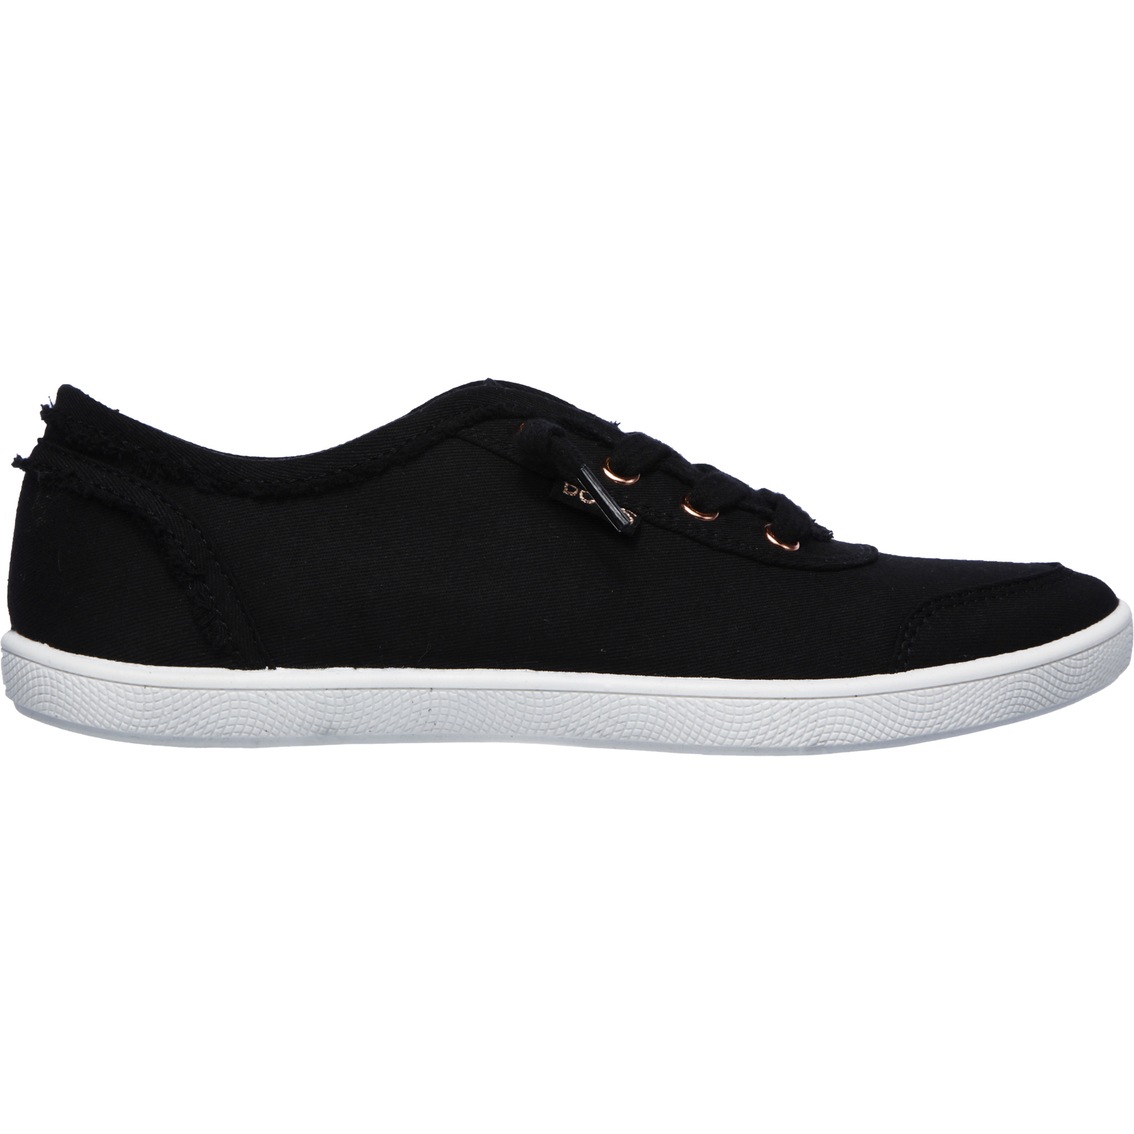 BOBS from Skechers Women's Bobs B Cute Sneakers - Image 2 of 5